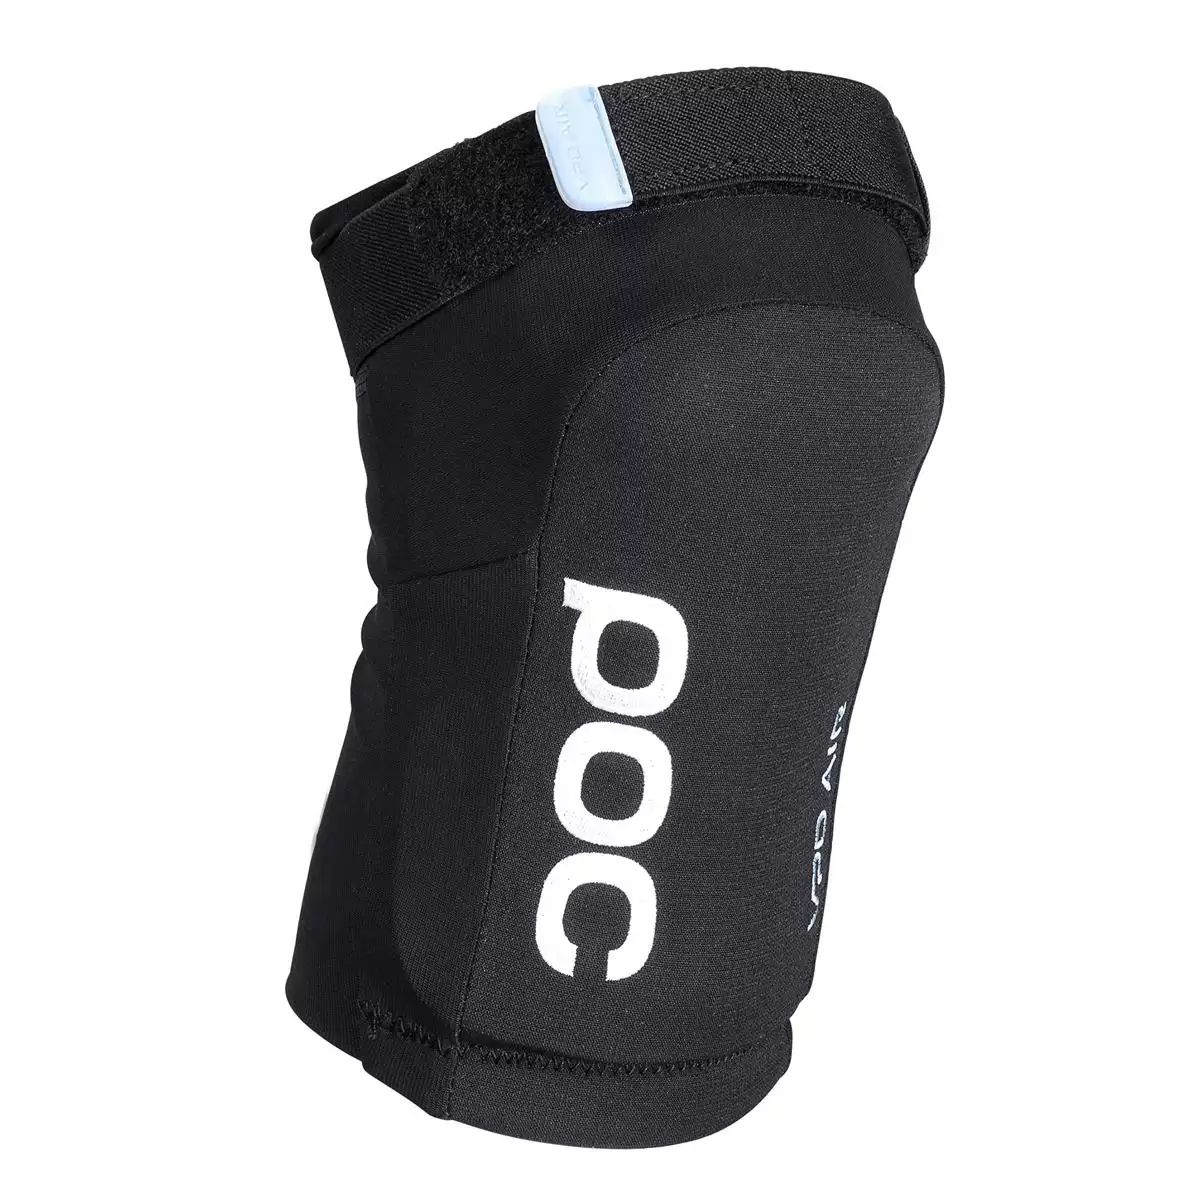 Joint VPD Air Knee pads black Size L - image